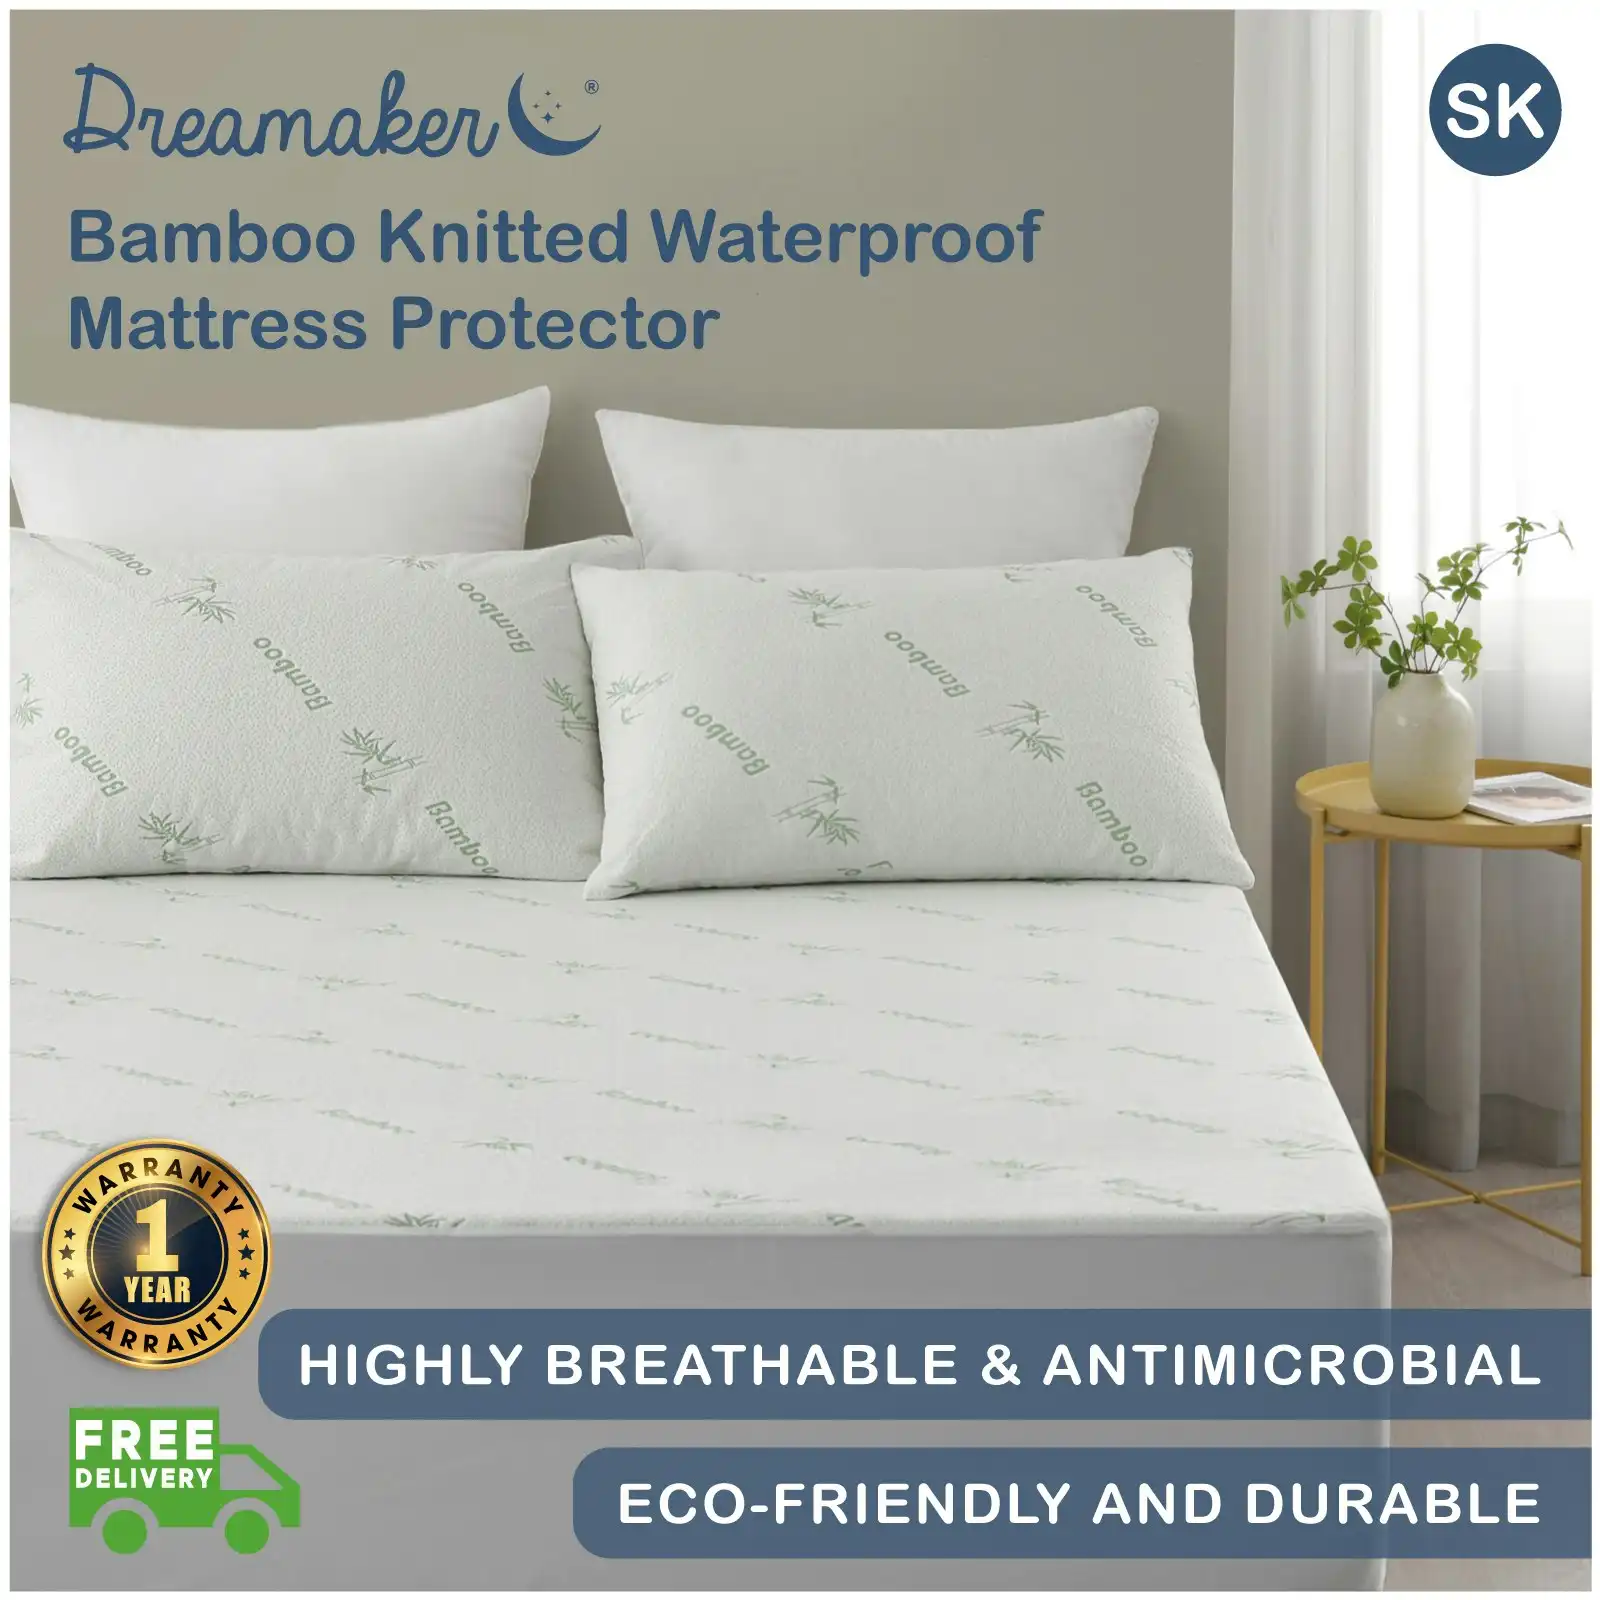 Dreamaker Bamboo Knitted Waterproof Mattress Protector Super King Bed